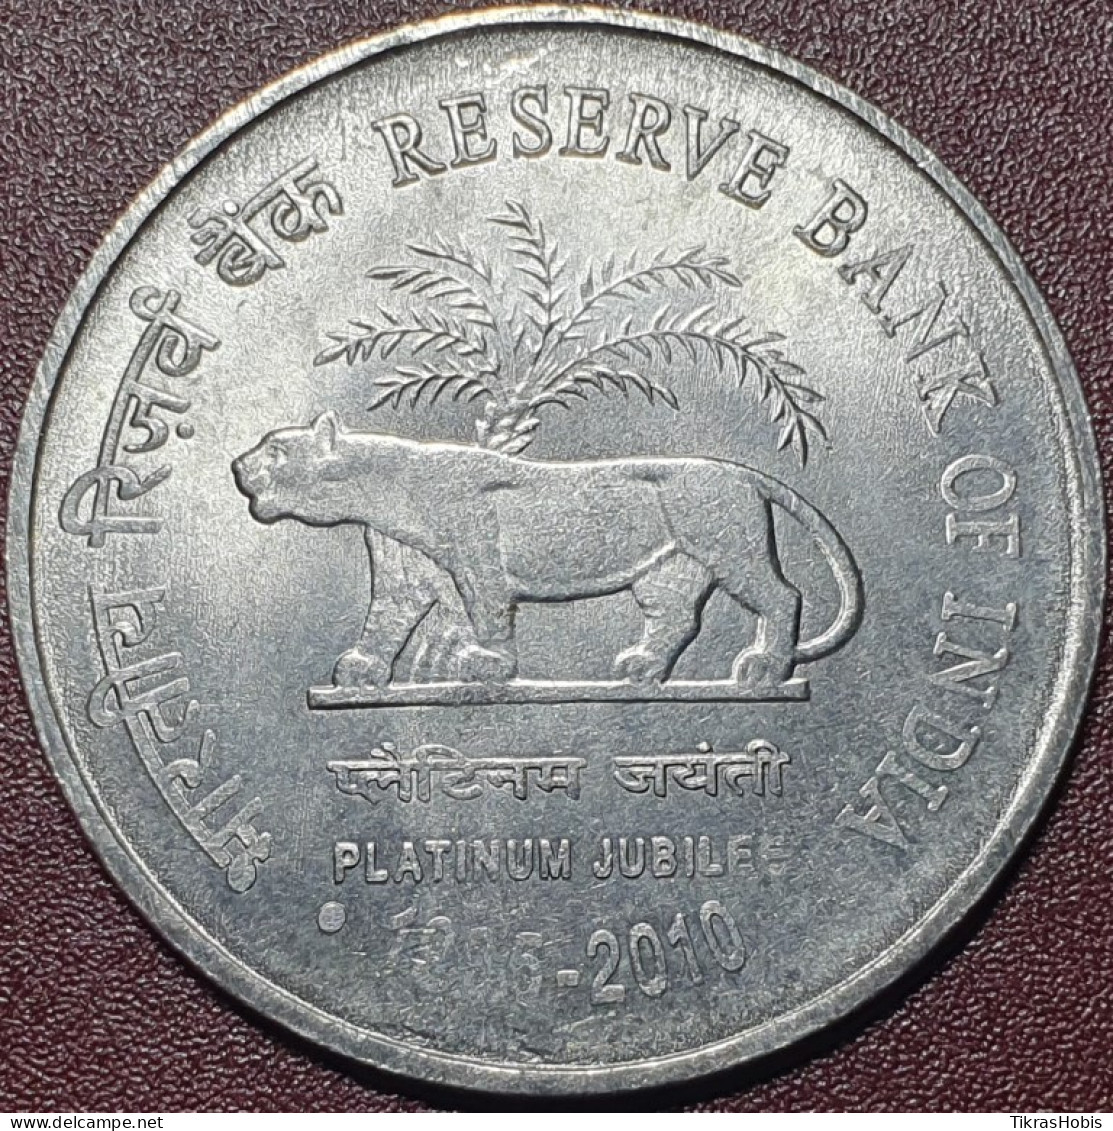 India 2 Rupees, 2010 Reserves Bank 75 Km386 - India